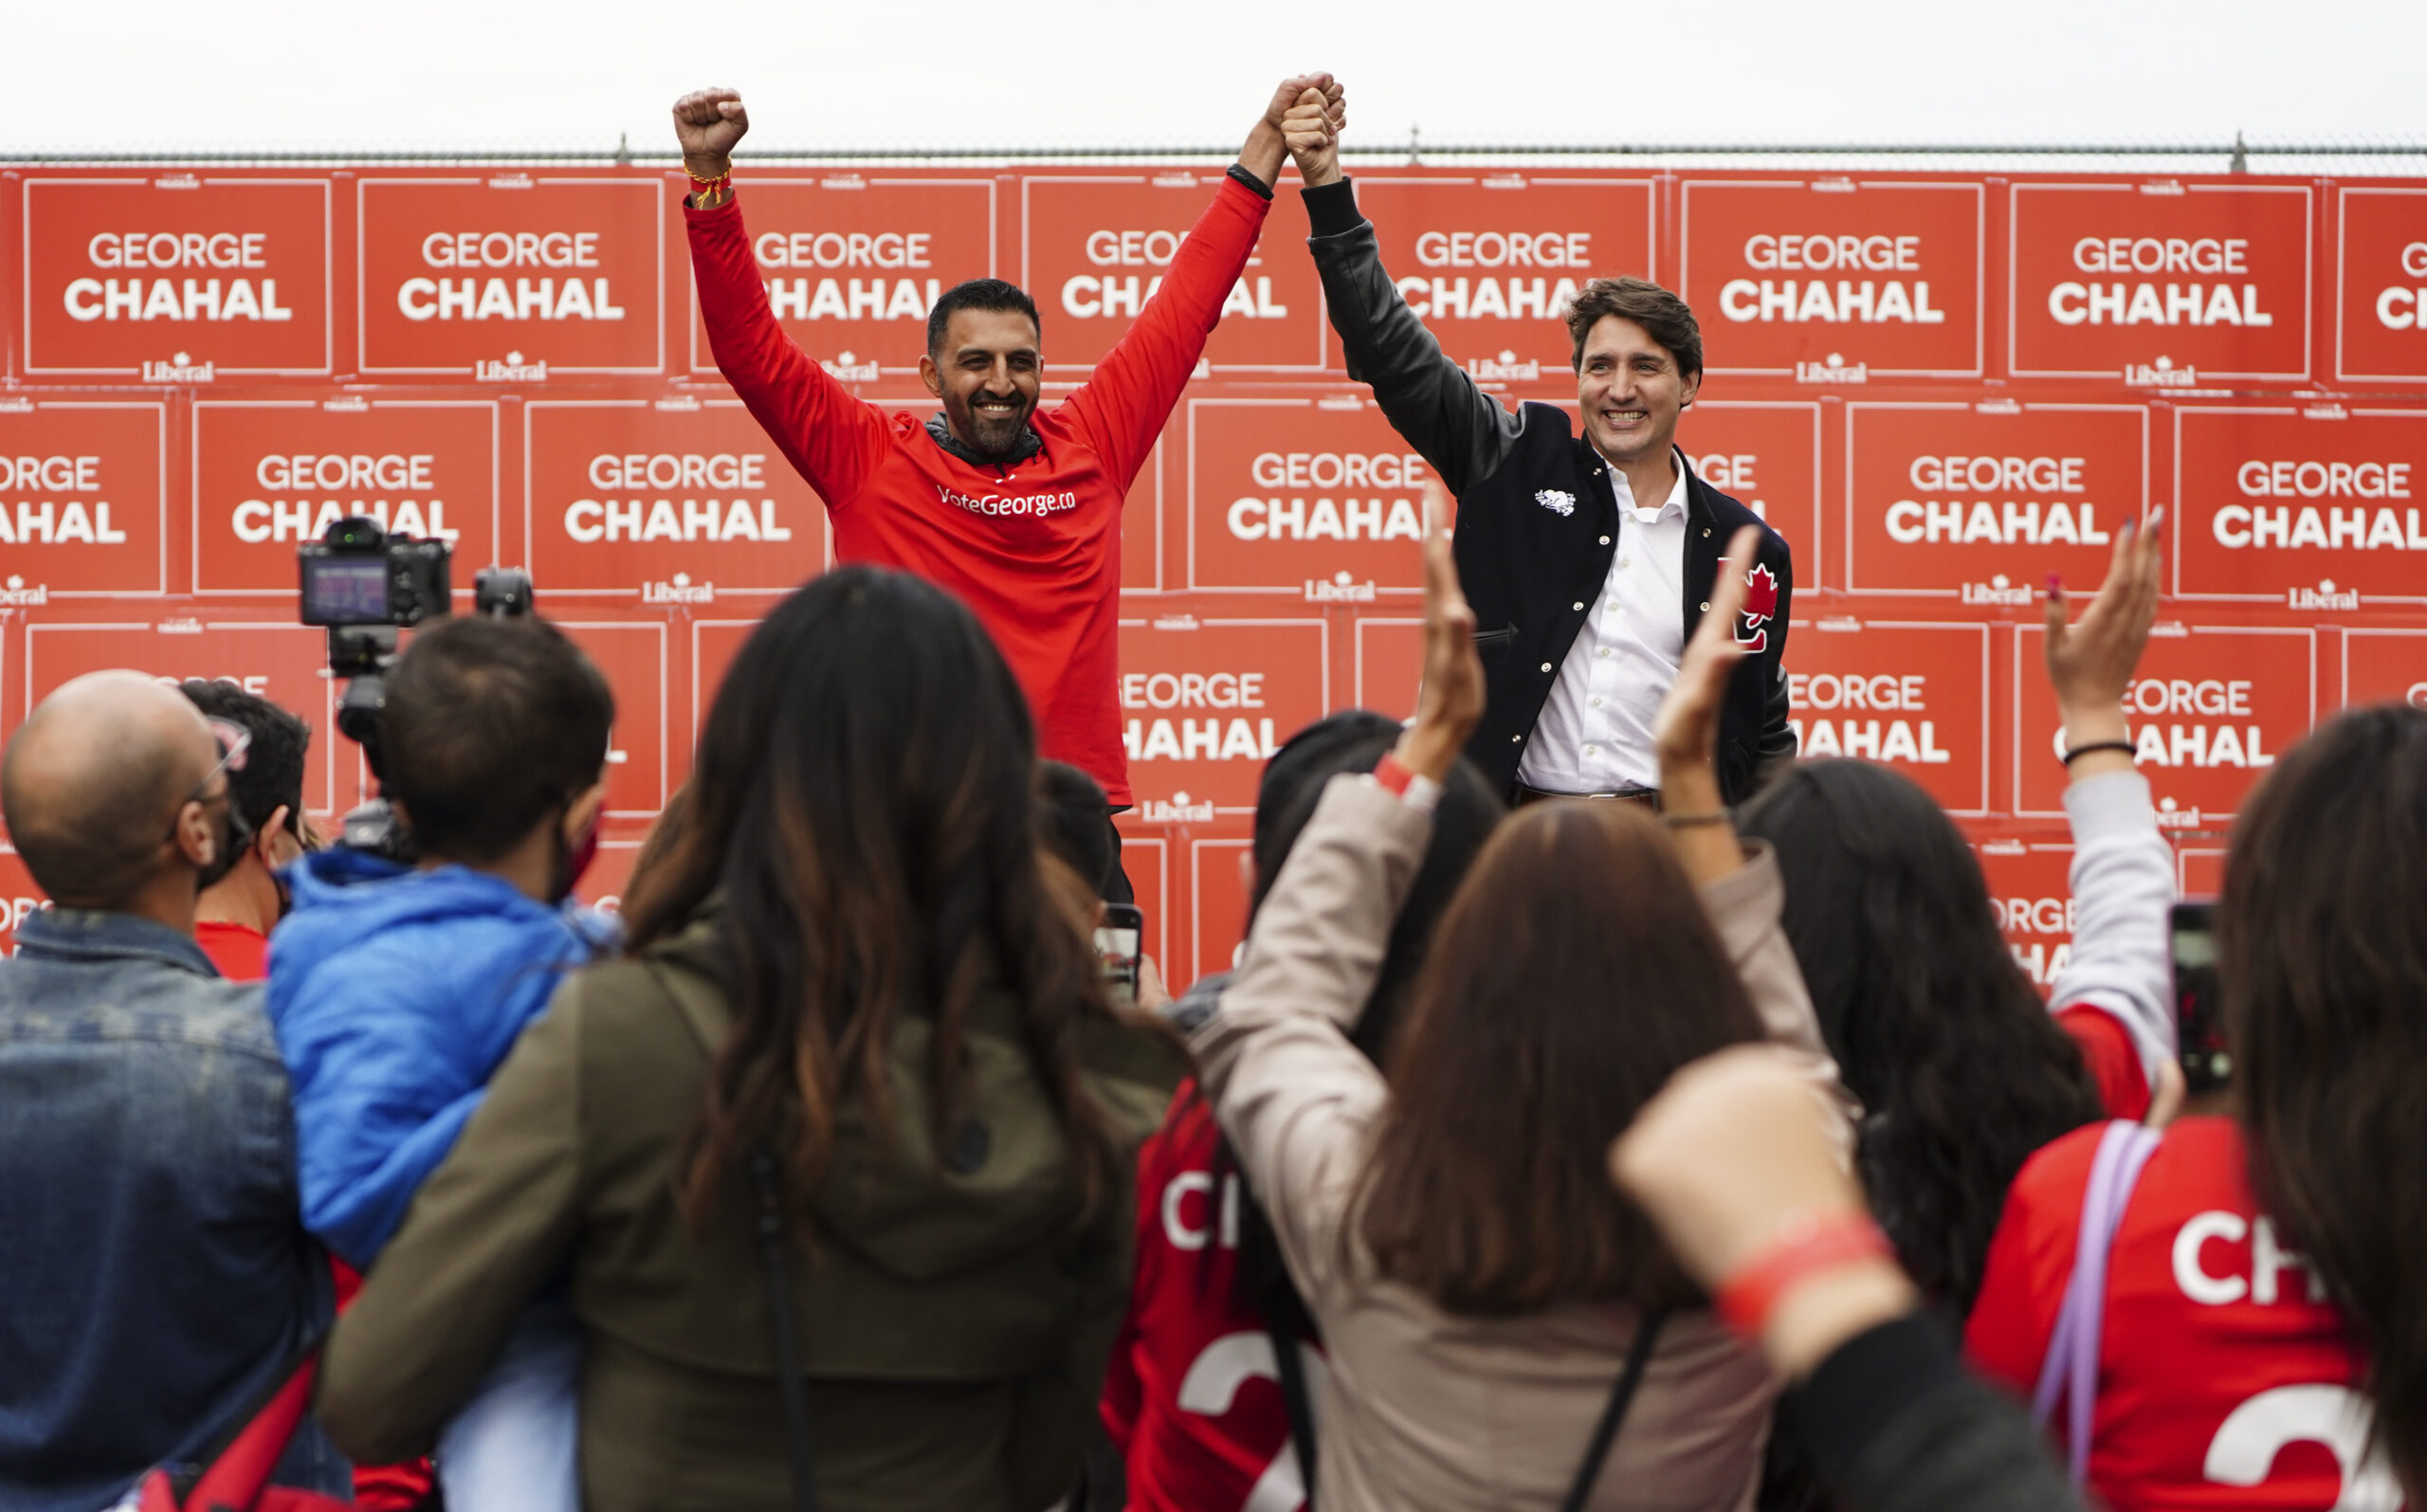 A man in red raises his hands and holds the raised hand of another man standing in front of a crowd with Liberal Party red signs in the background.